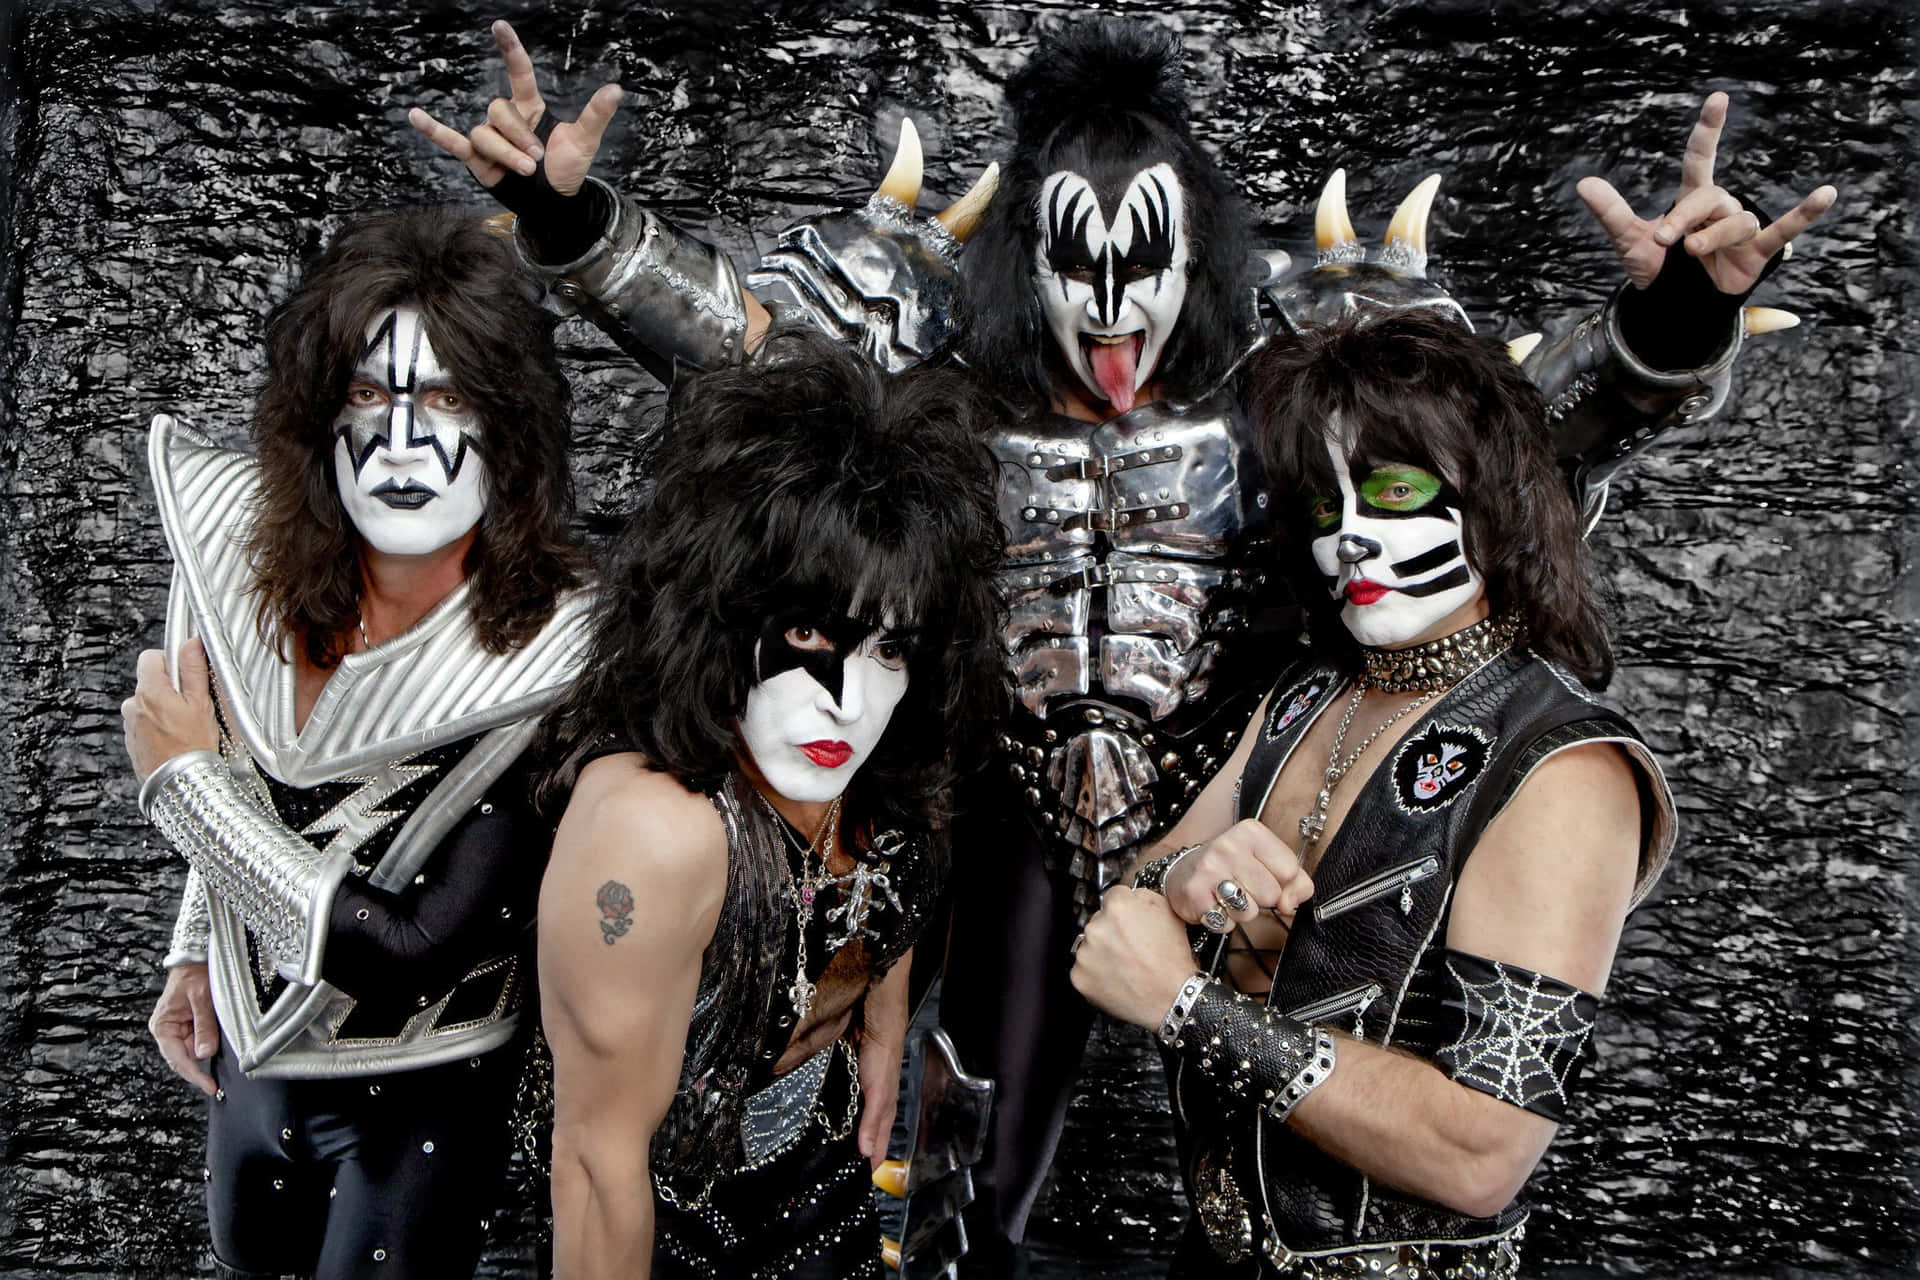 Kiss - A Group Of People In Black Makeup